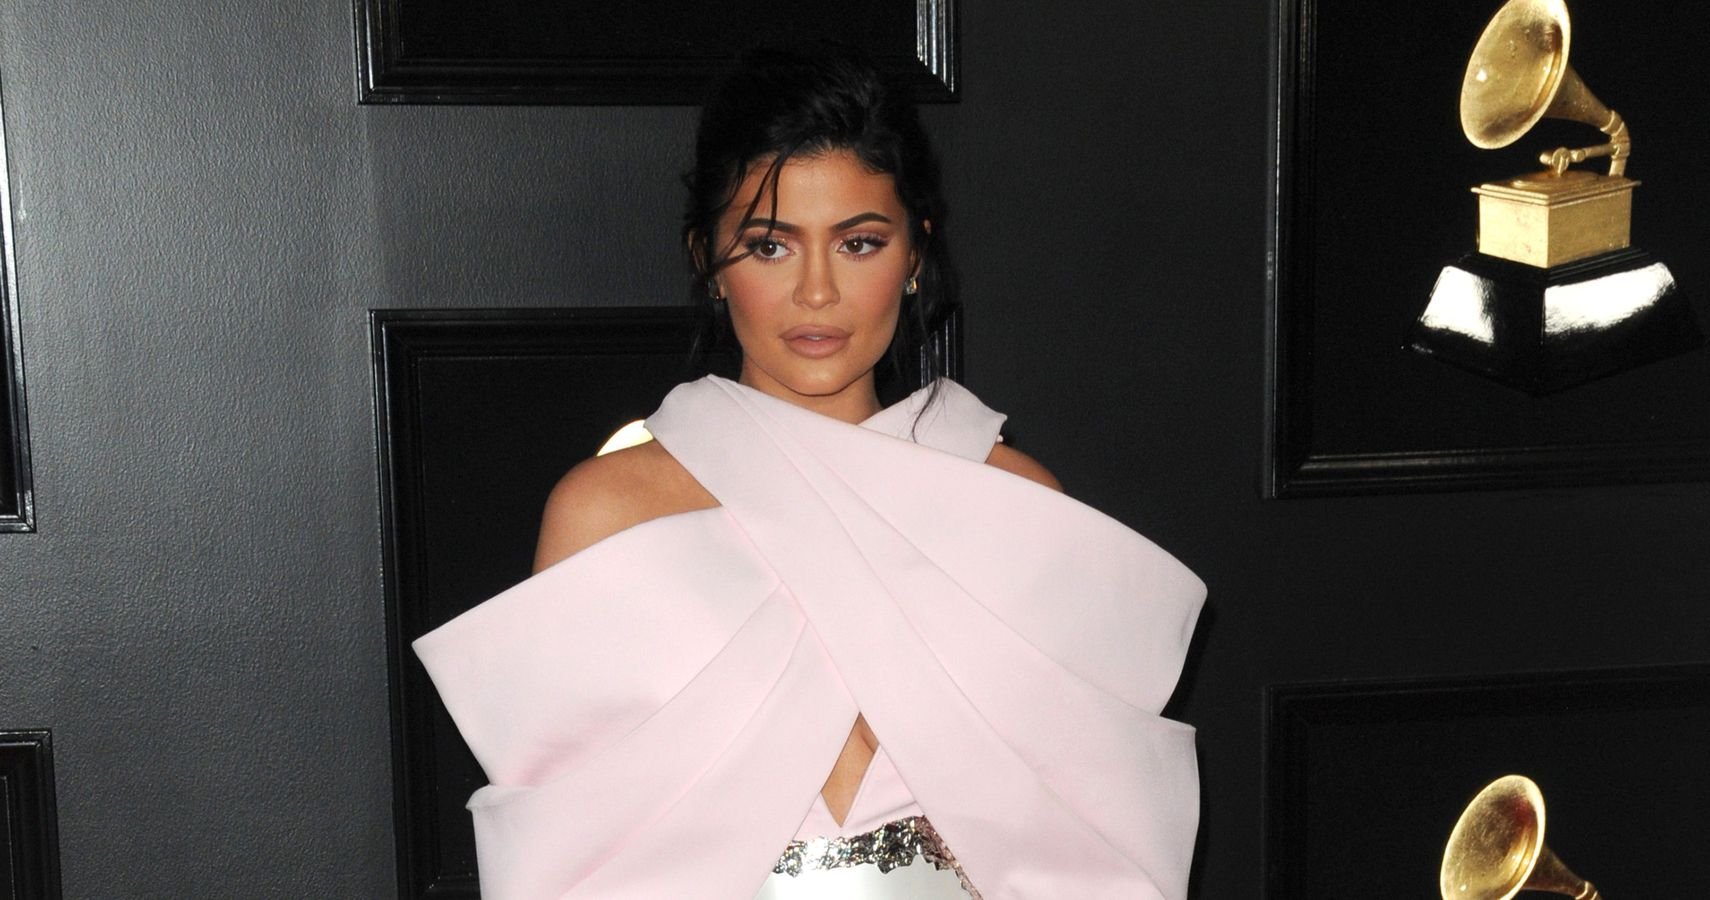 Out Of The Billionaires' Club: Why Forbes Dropped Kylie Jenner From The Billionaires' List